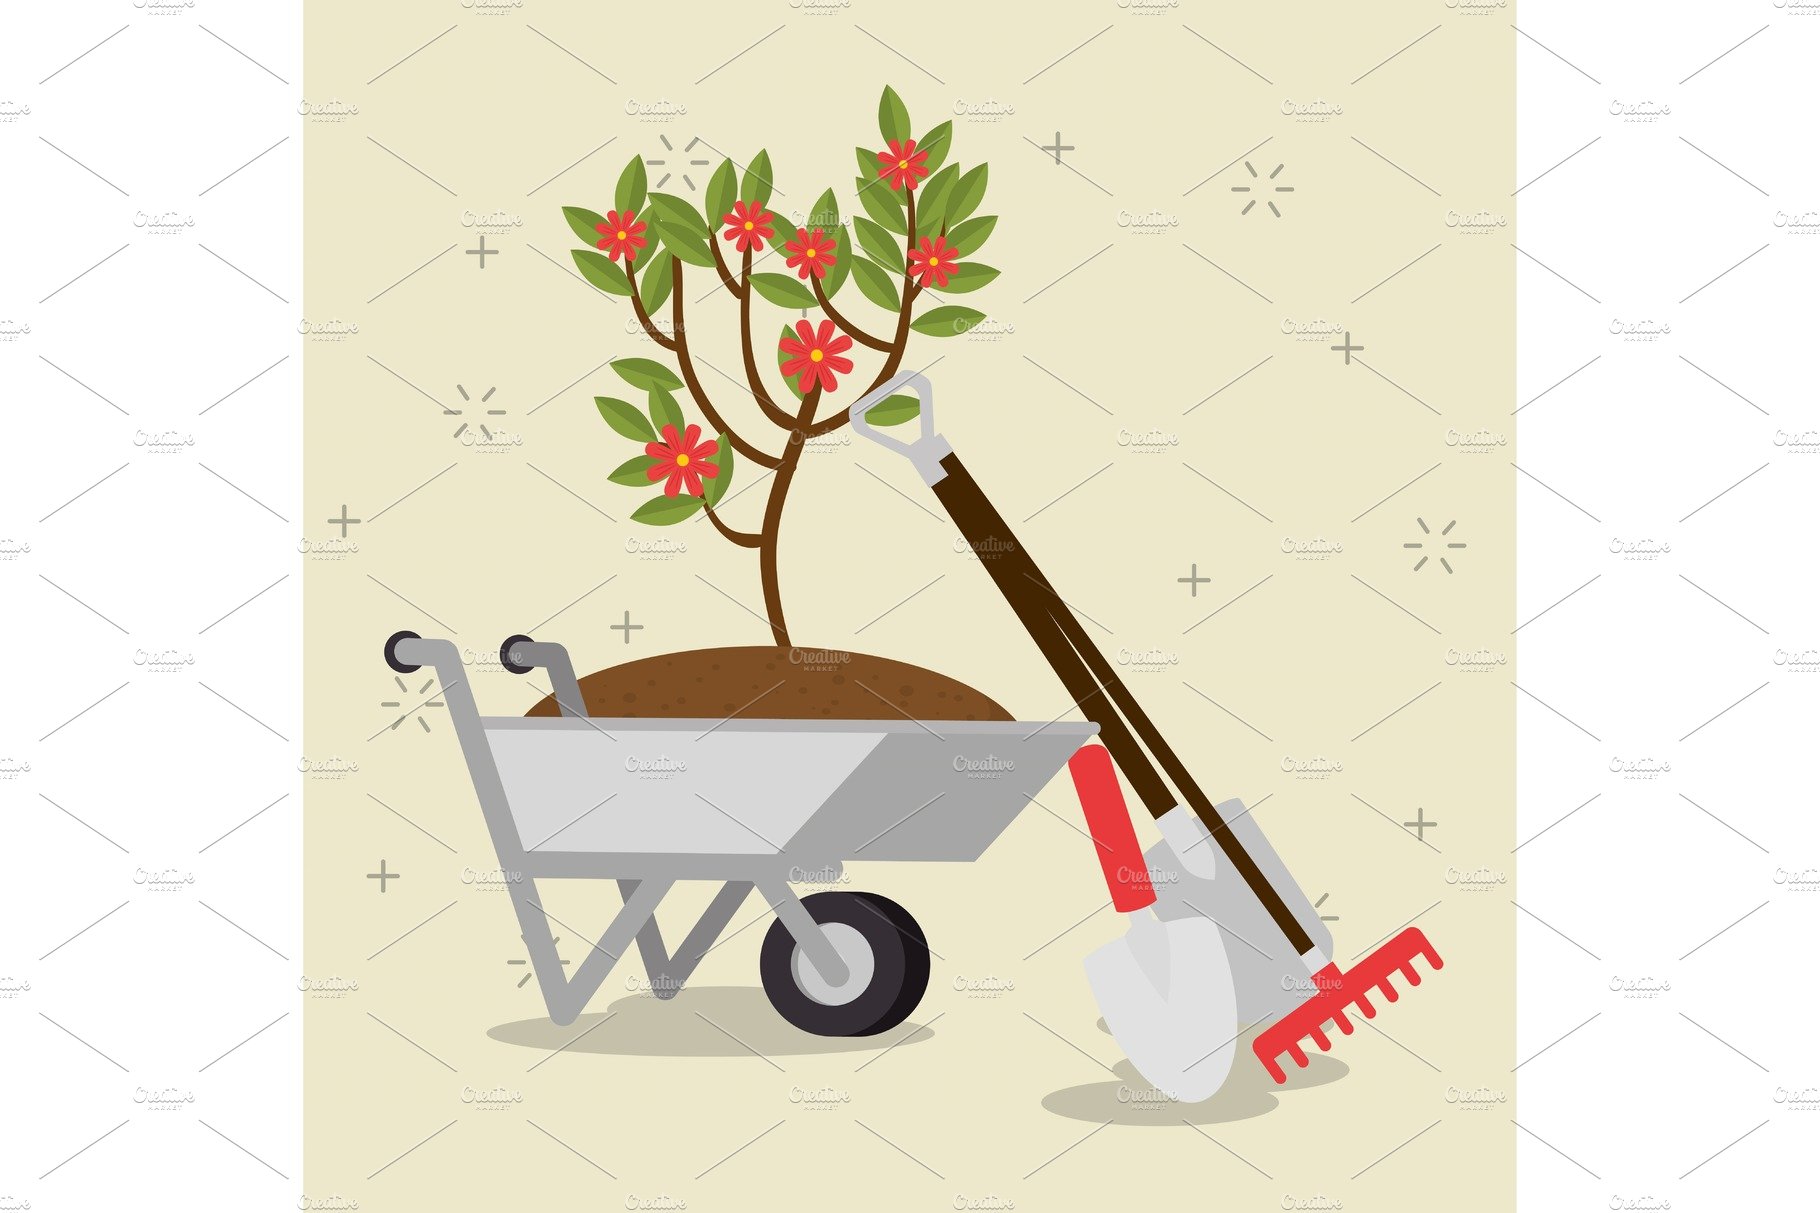 gardening elements and tools design cover image.